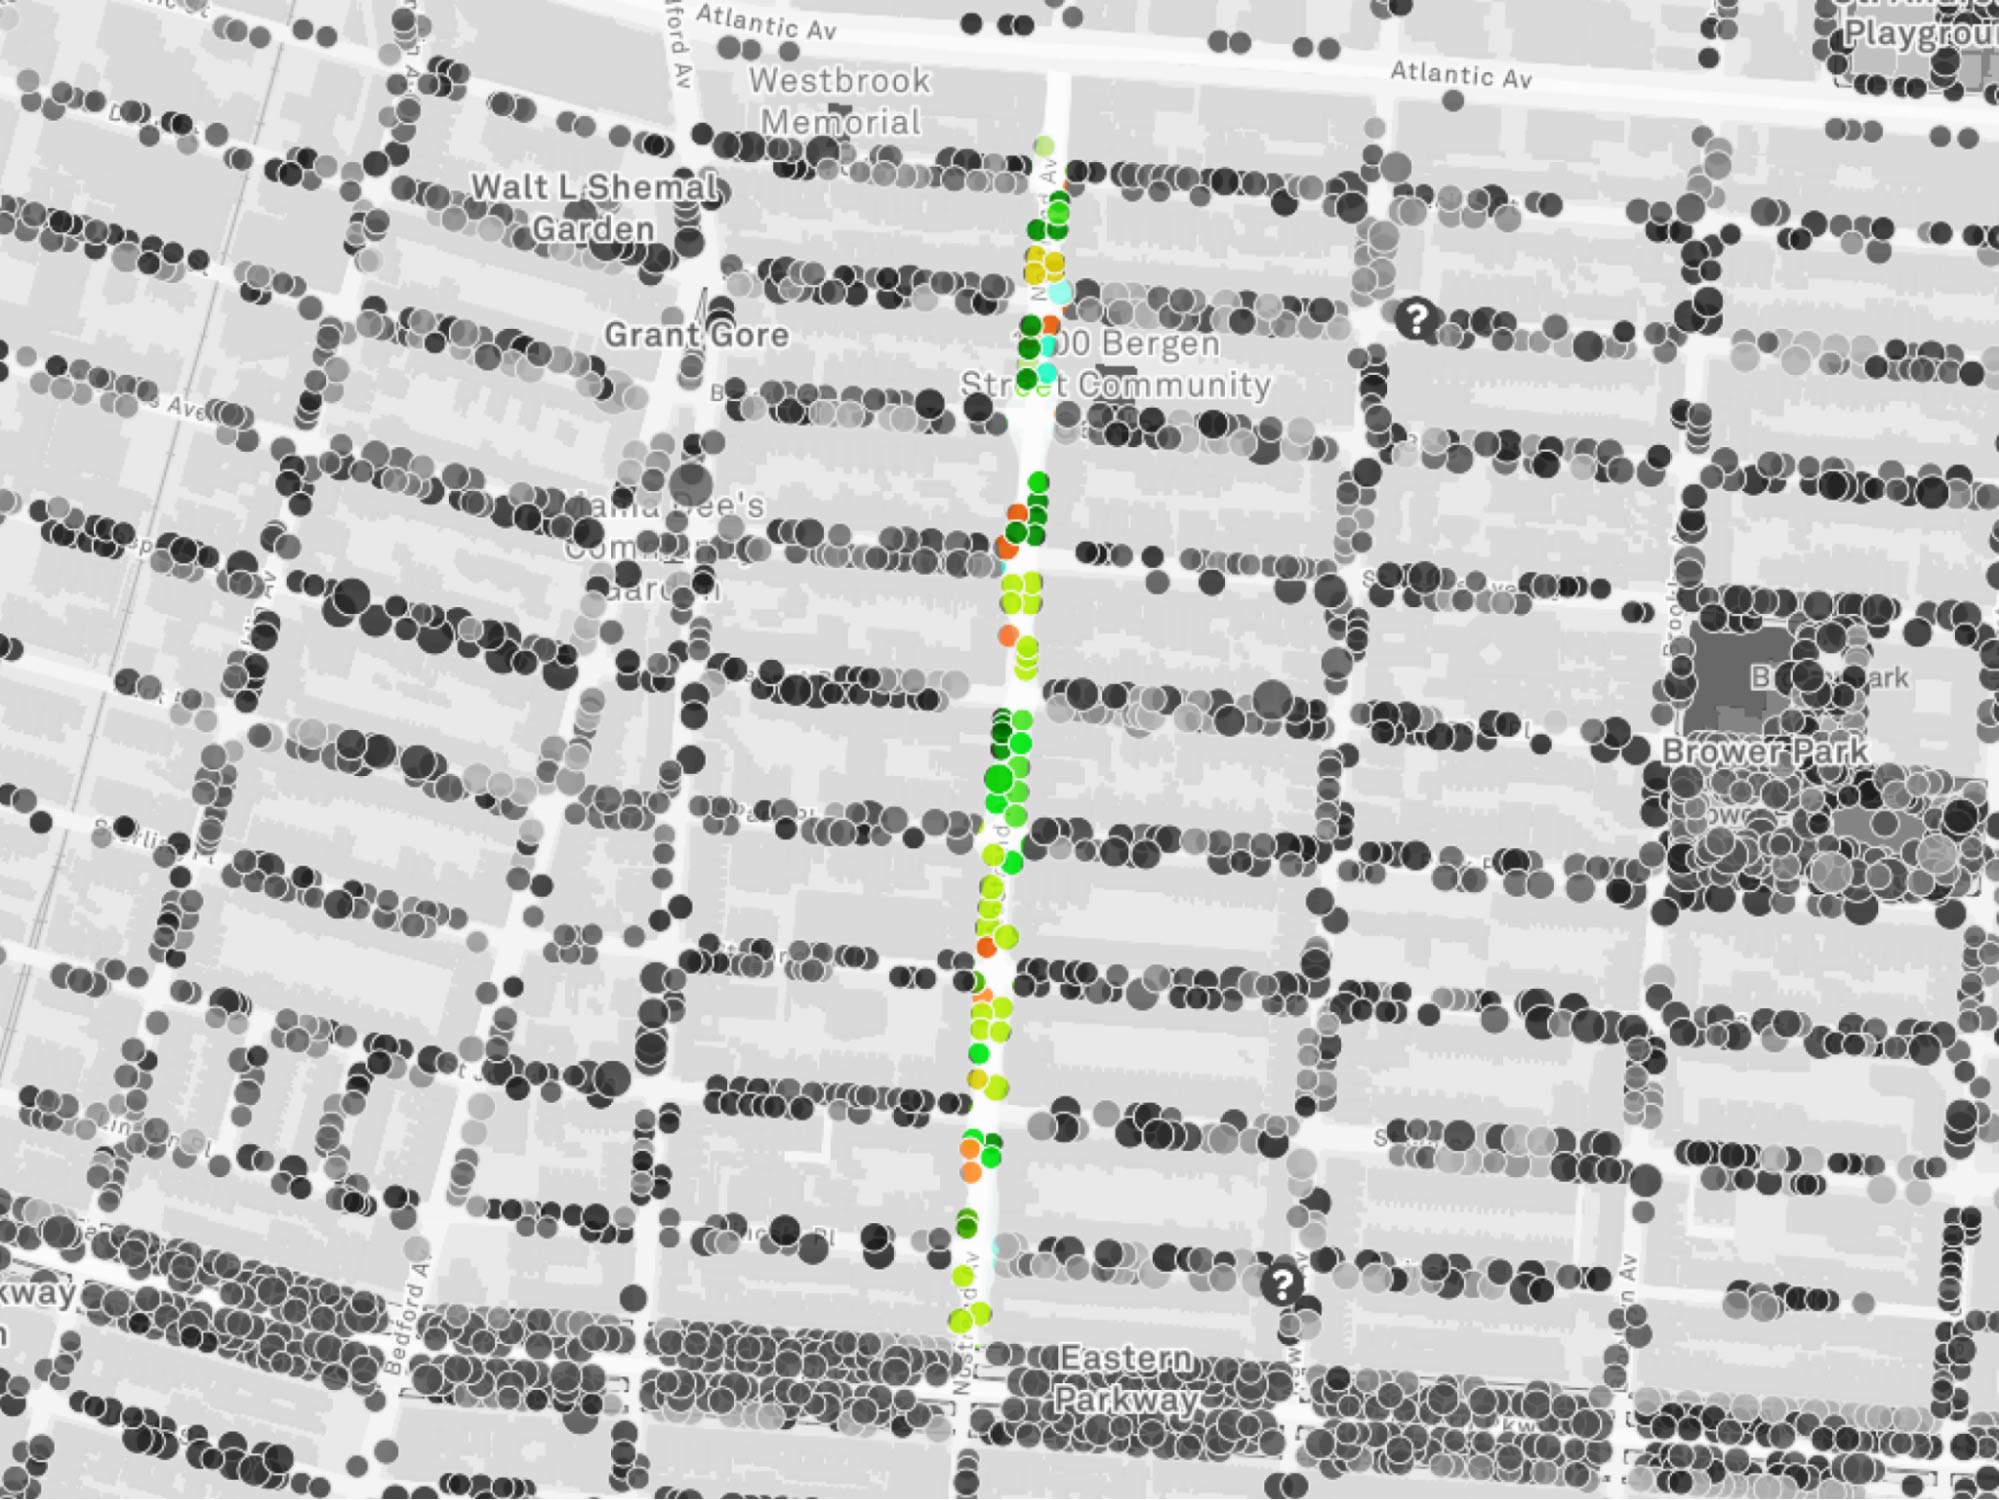 Map with colored dots representing placement of nature along streets